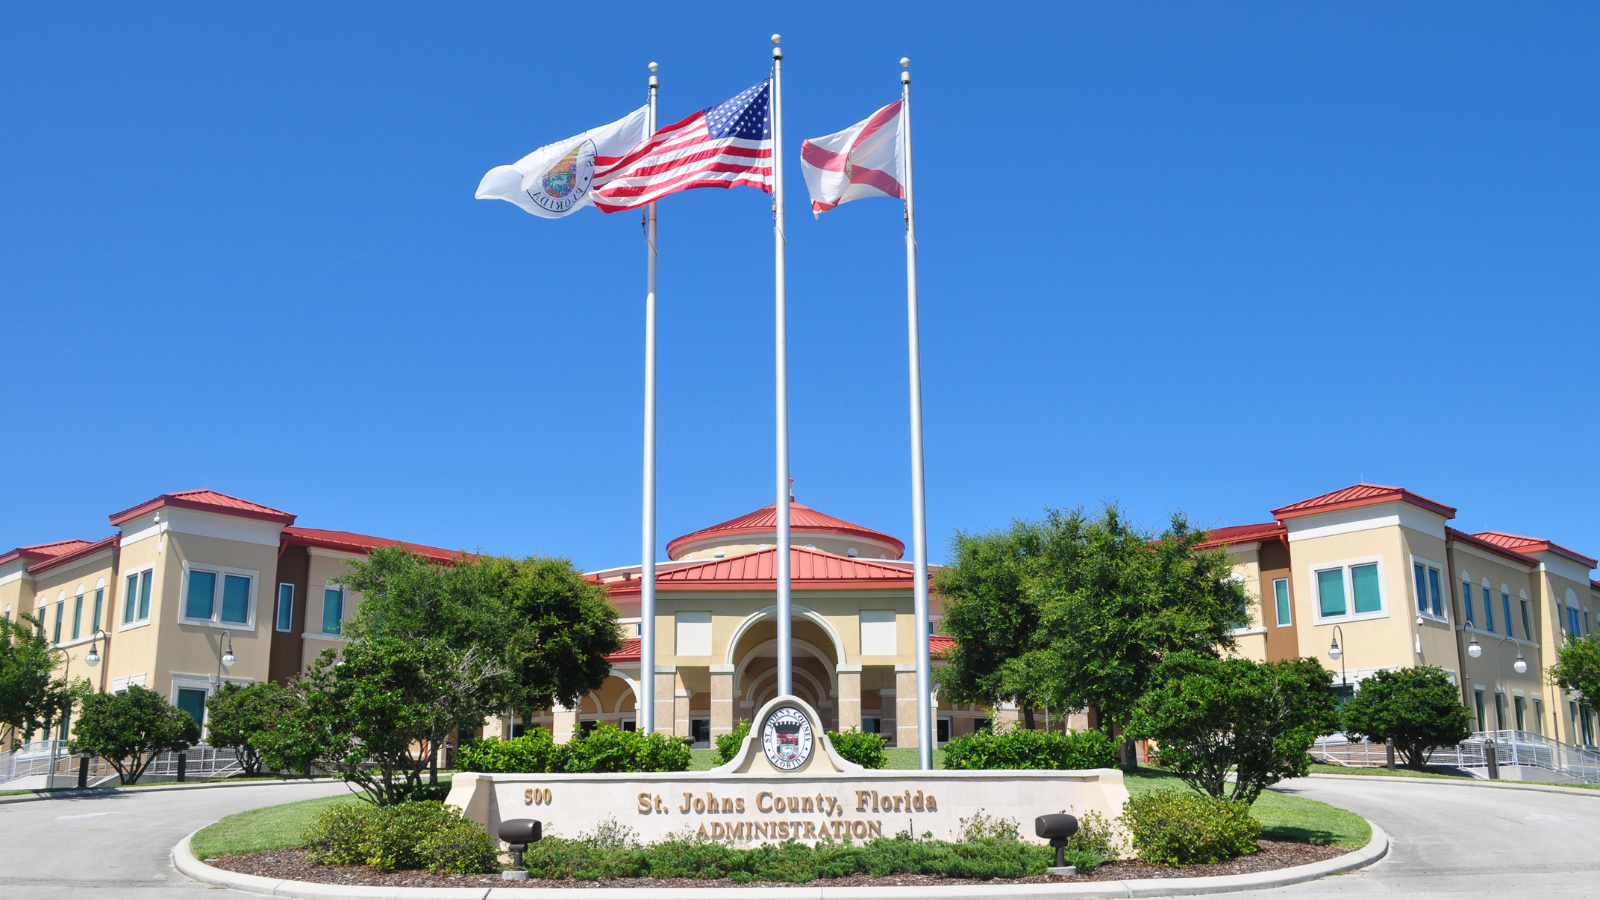 St. Johns County Administration Building with flags